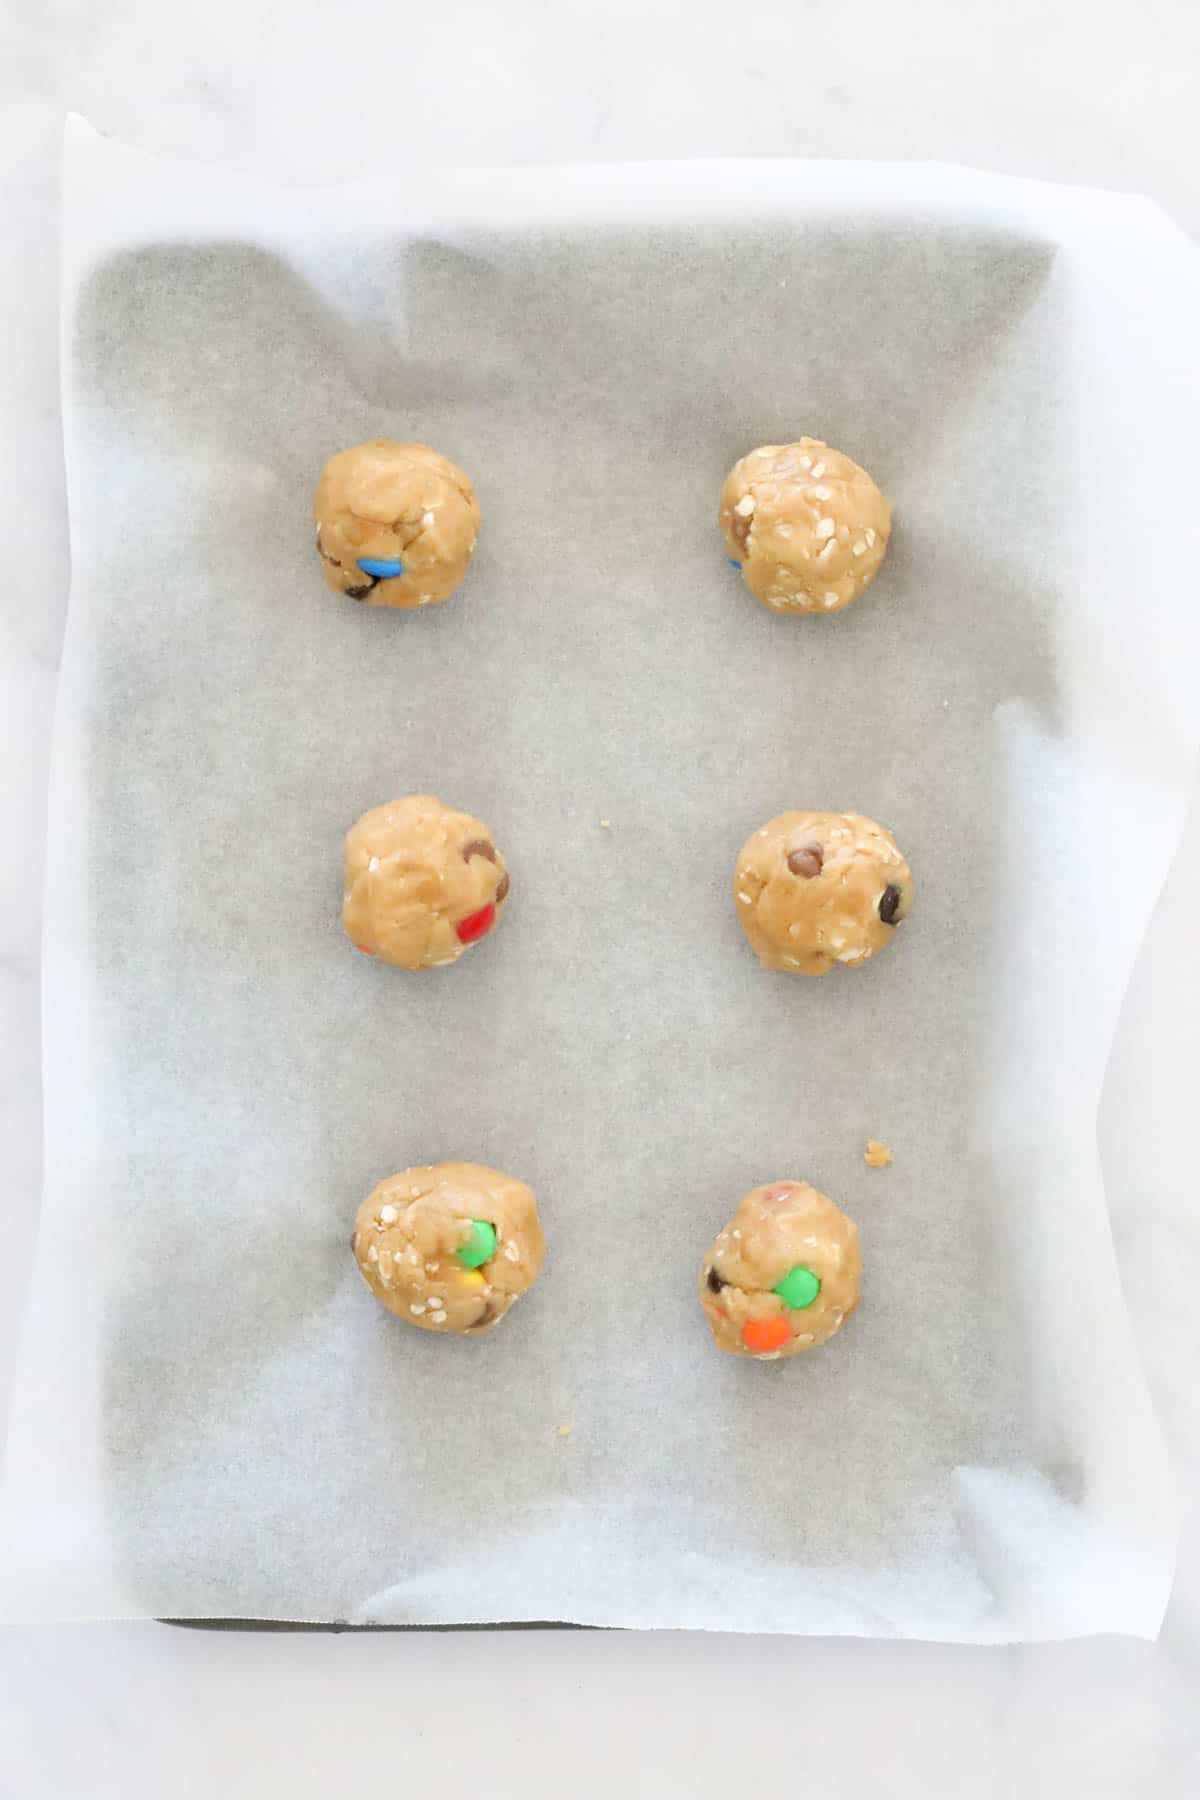 Cookie dough balls on a tray.